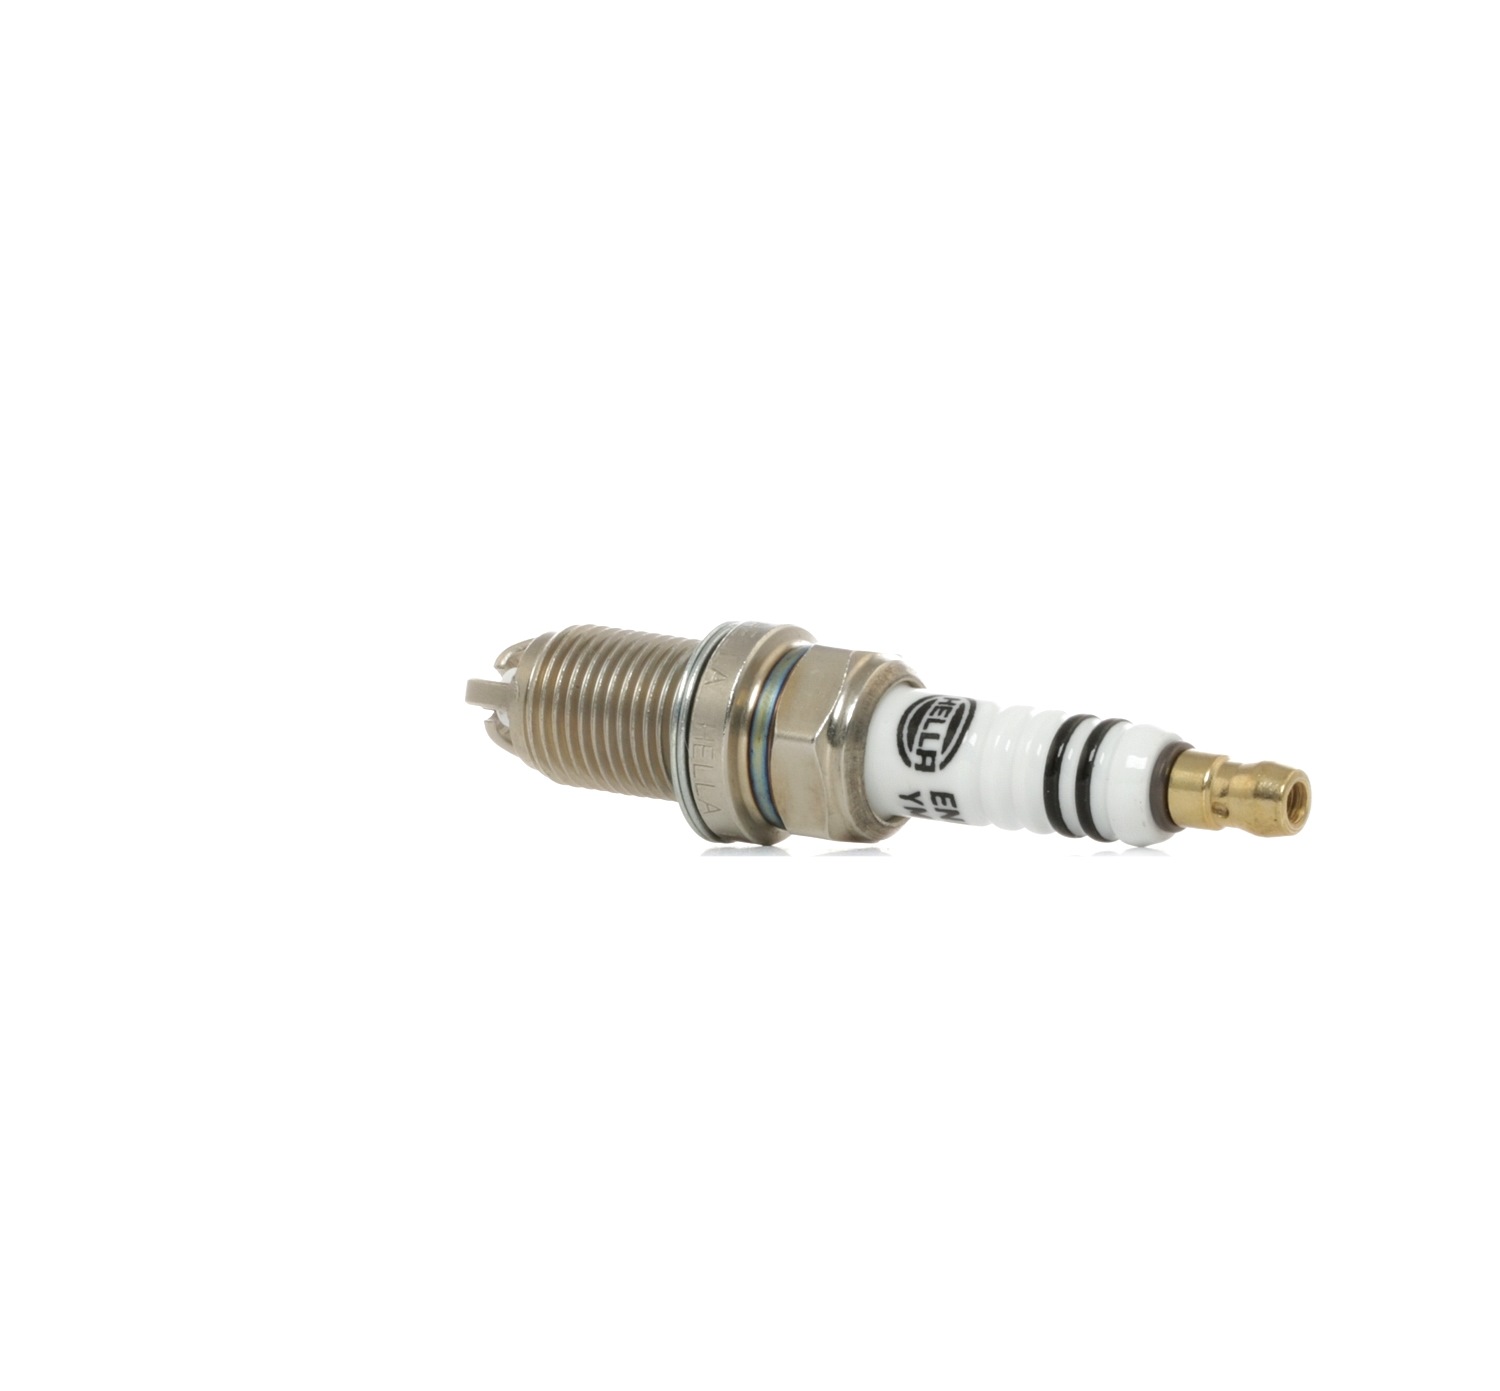 HELLA 8EH 188 704-401 Spark plug cheap in online store